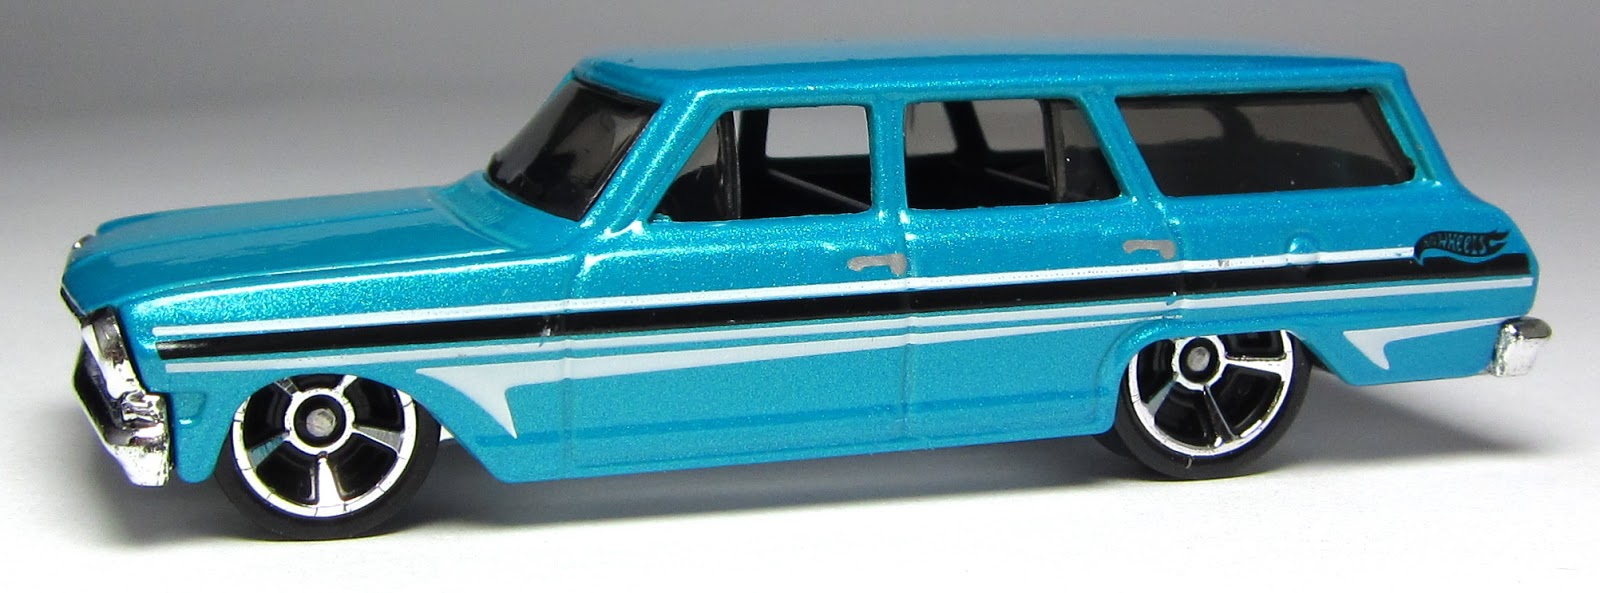 First Look: Hot Wheels '64 Chevy Nova Station Wagon (along with its Ch...